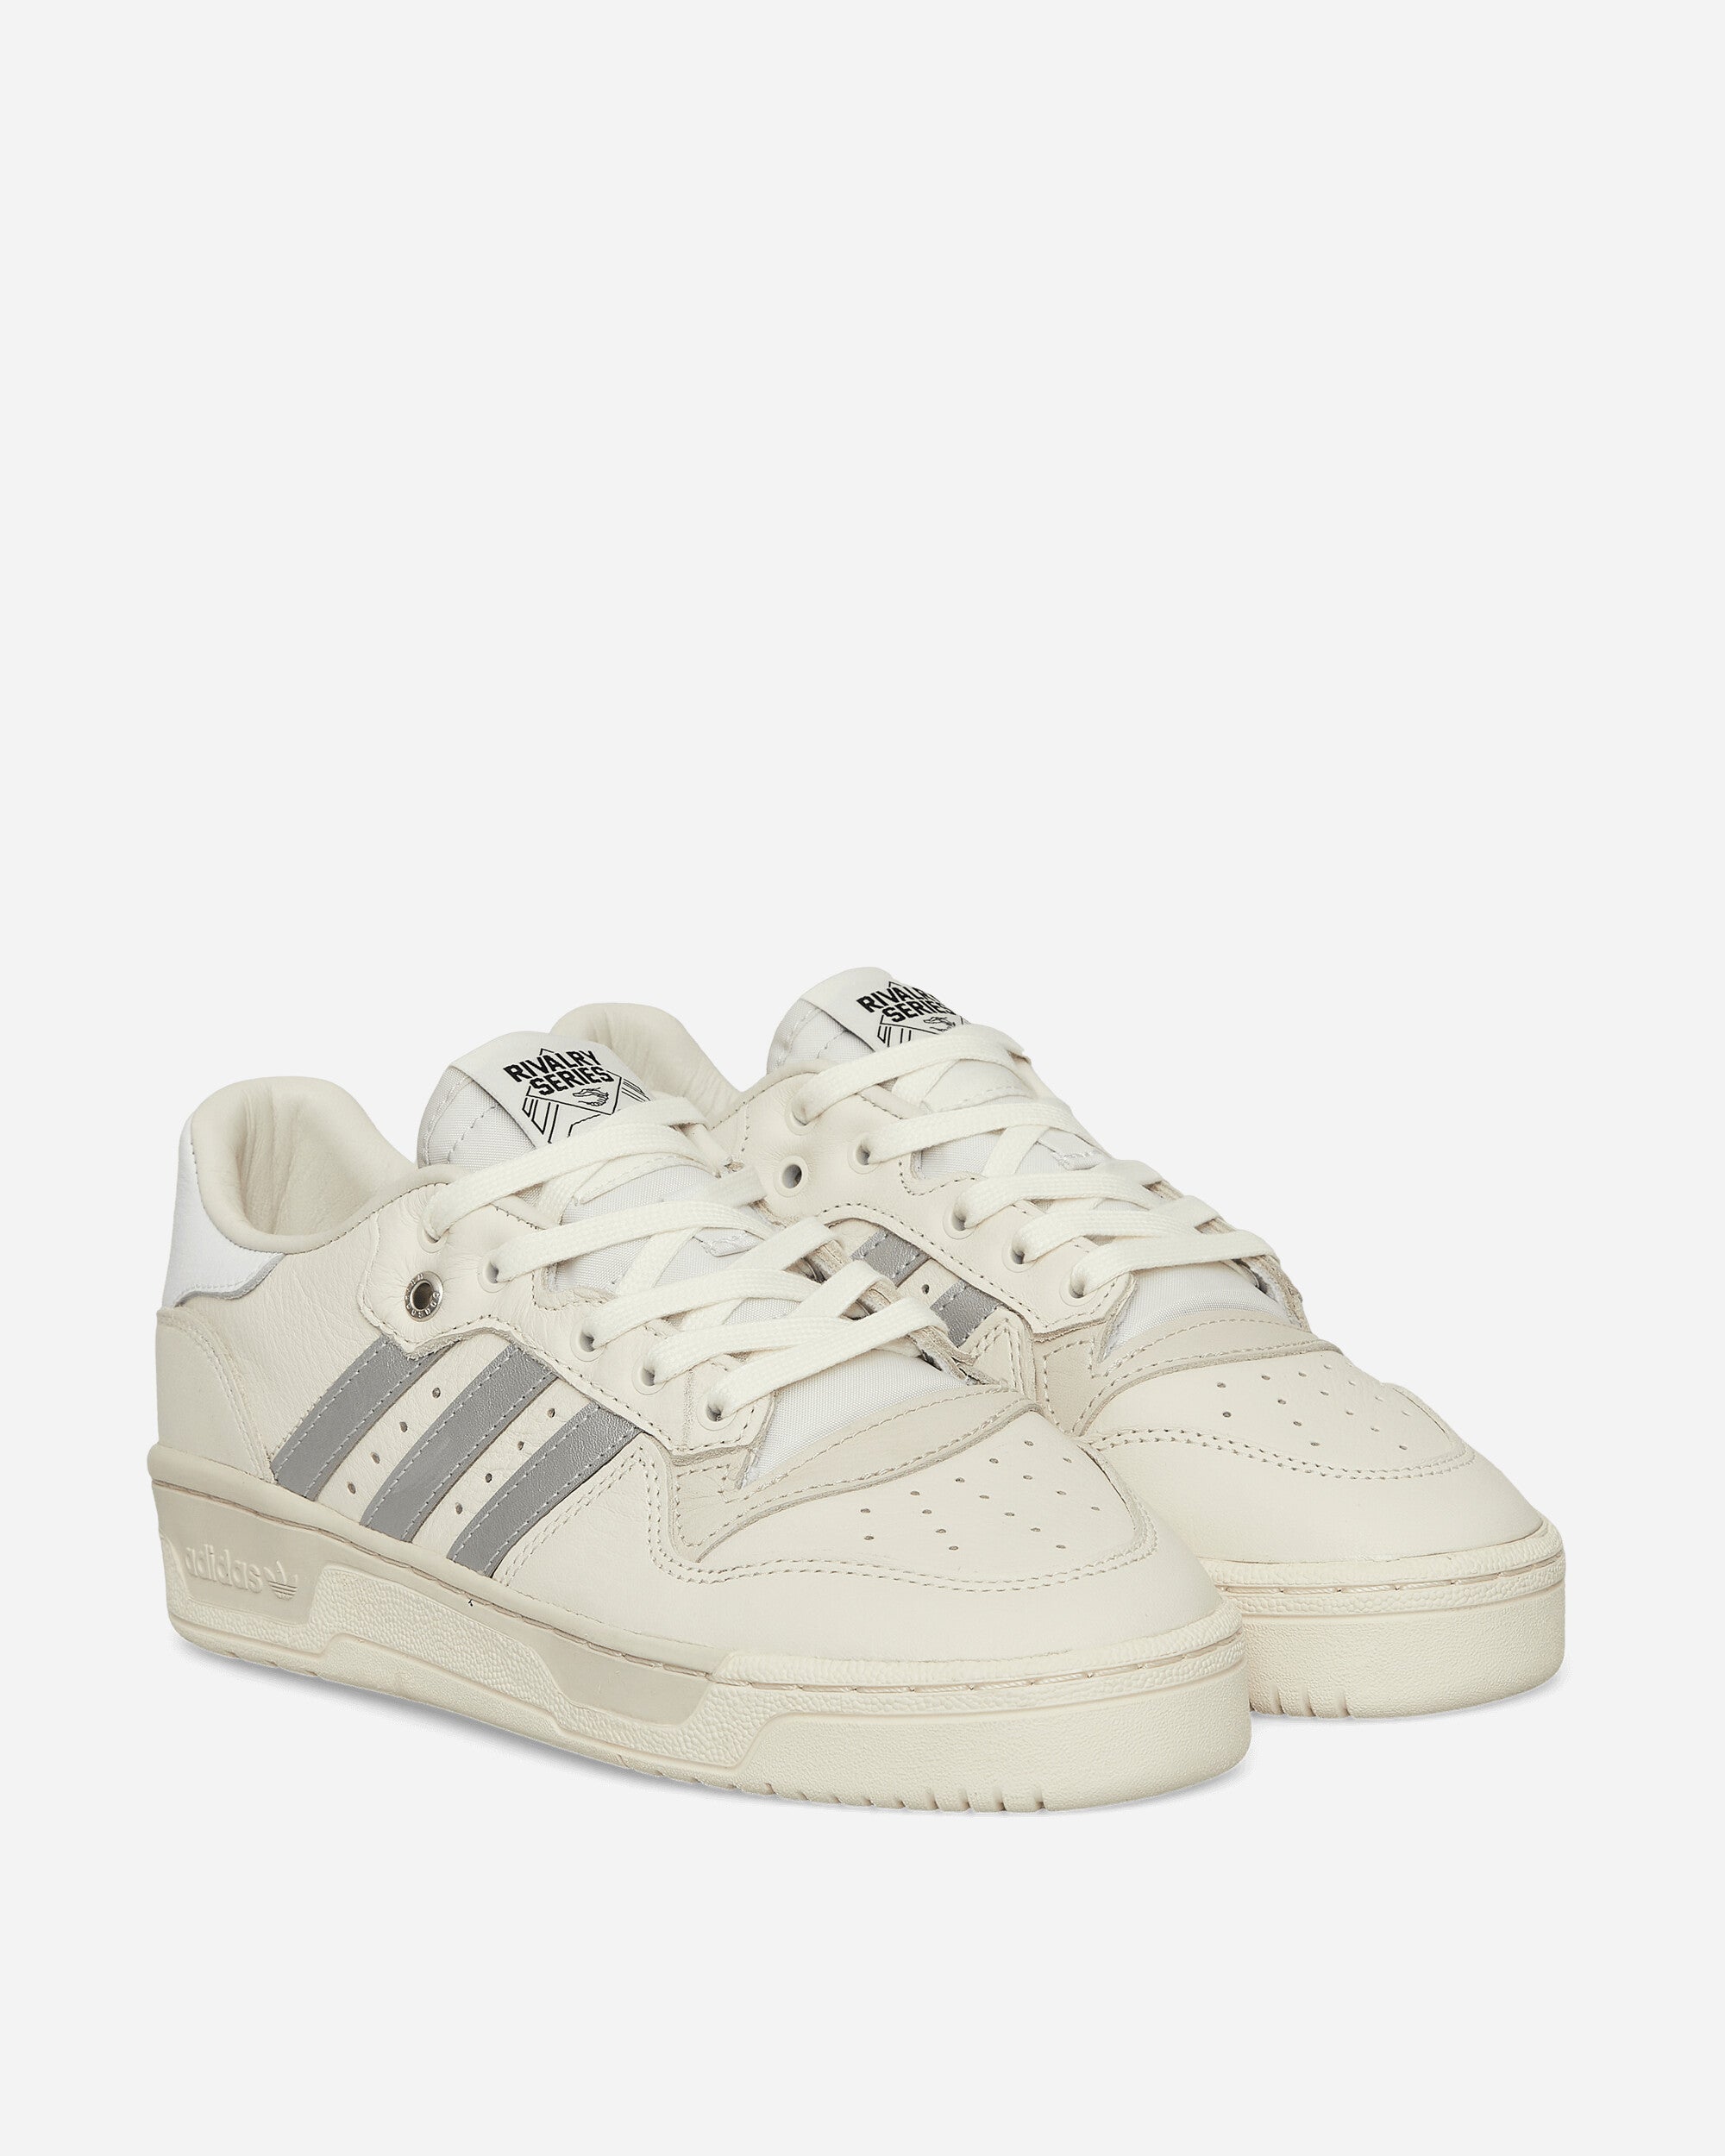 adidas Rivalry Low Consortium Chalk White/Silver Met Sneakers Low IF0603 001